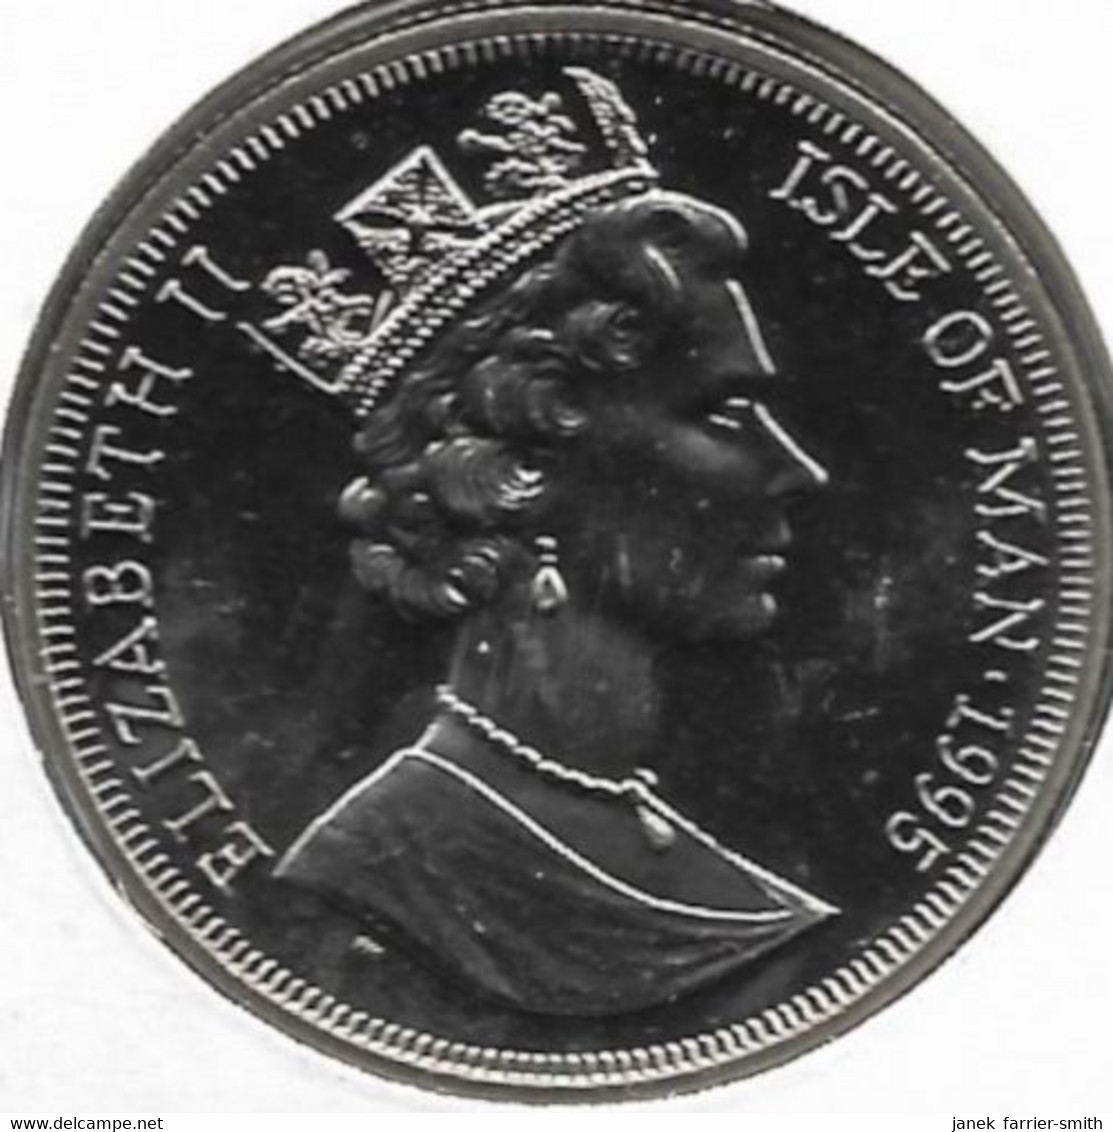 1995 Isle Of Man 1 Crown 95th Birthday Queen Elizabeth The Queen Mother Coin Cover - Isle Of Man